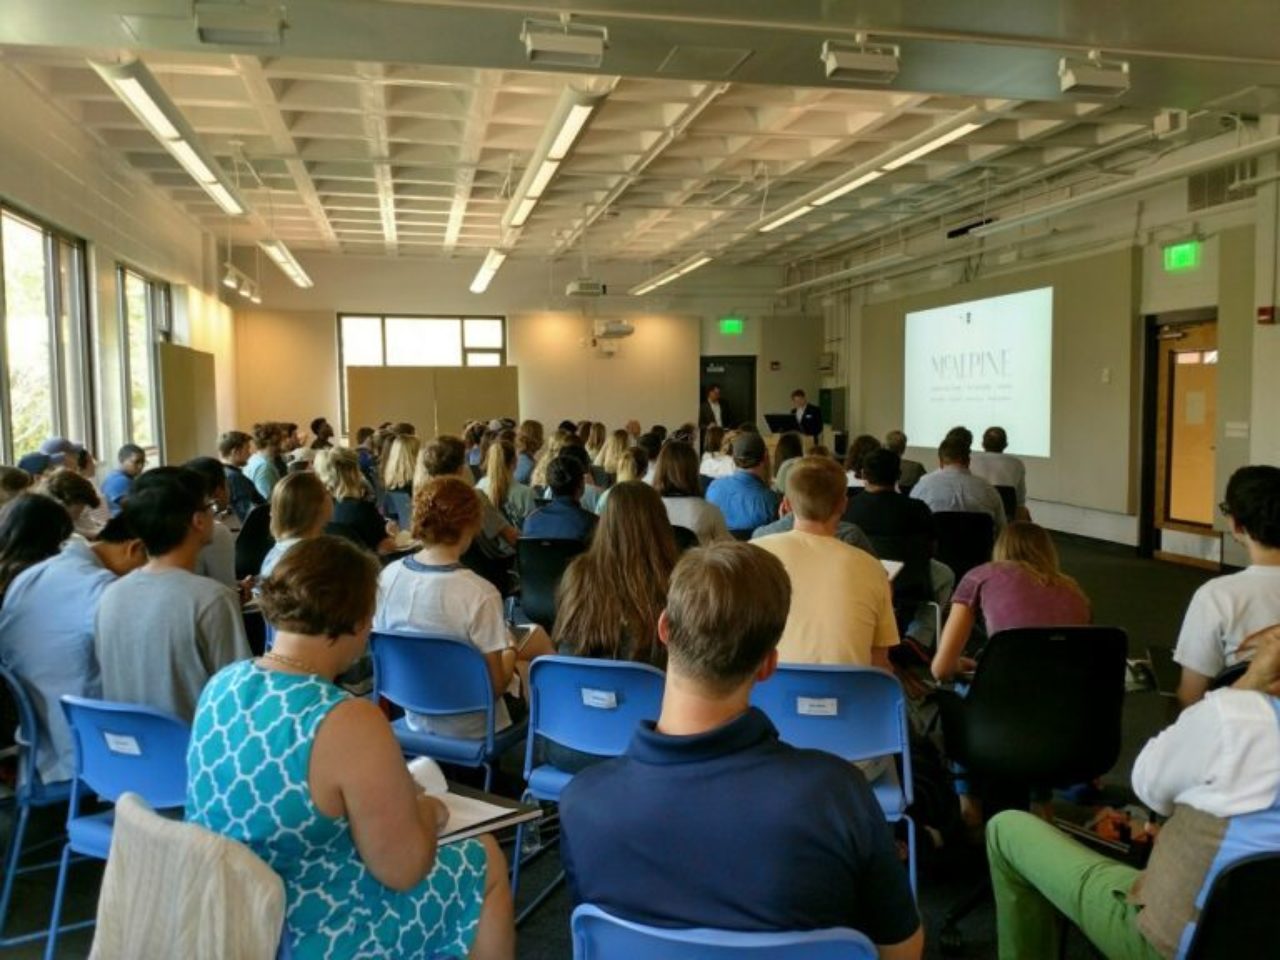 Students gathered for a workshop lecture